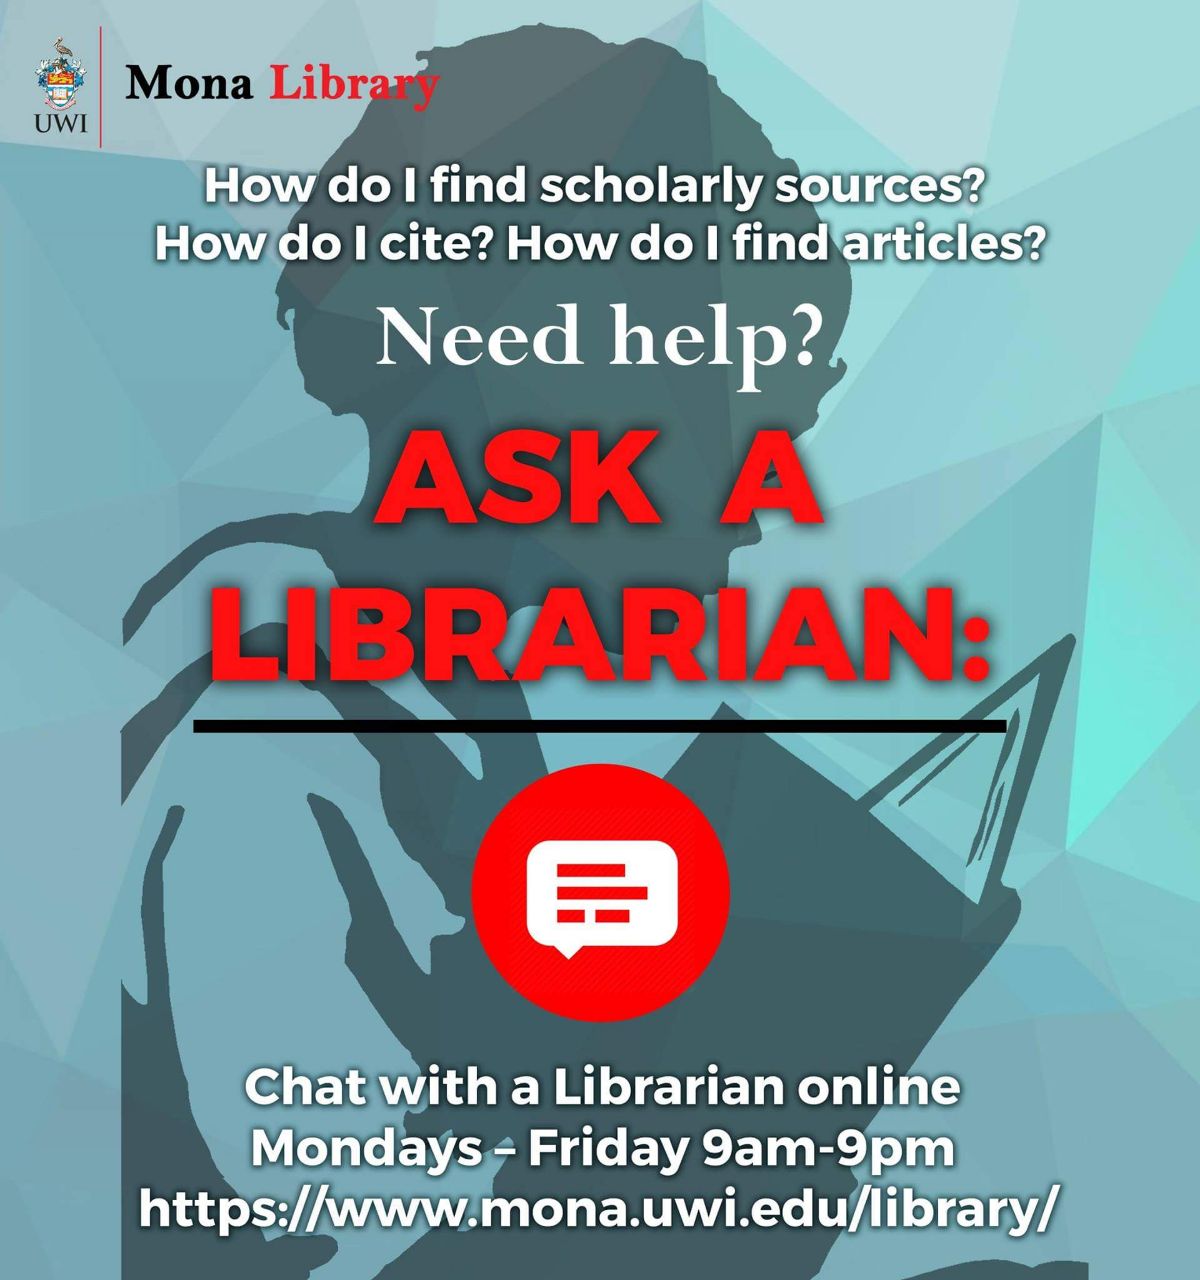 MSBM, UWI Mona on X: "Need help? Ask a Librarian! #MSBM #ForwardThinking  #Resources #Education #UseYourLibrary https://t.co/7yOOvzvfZL" / X